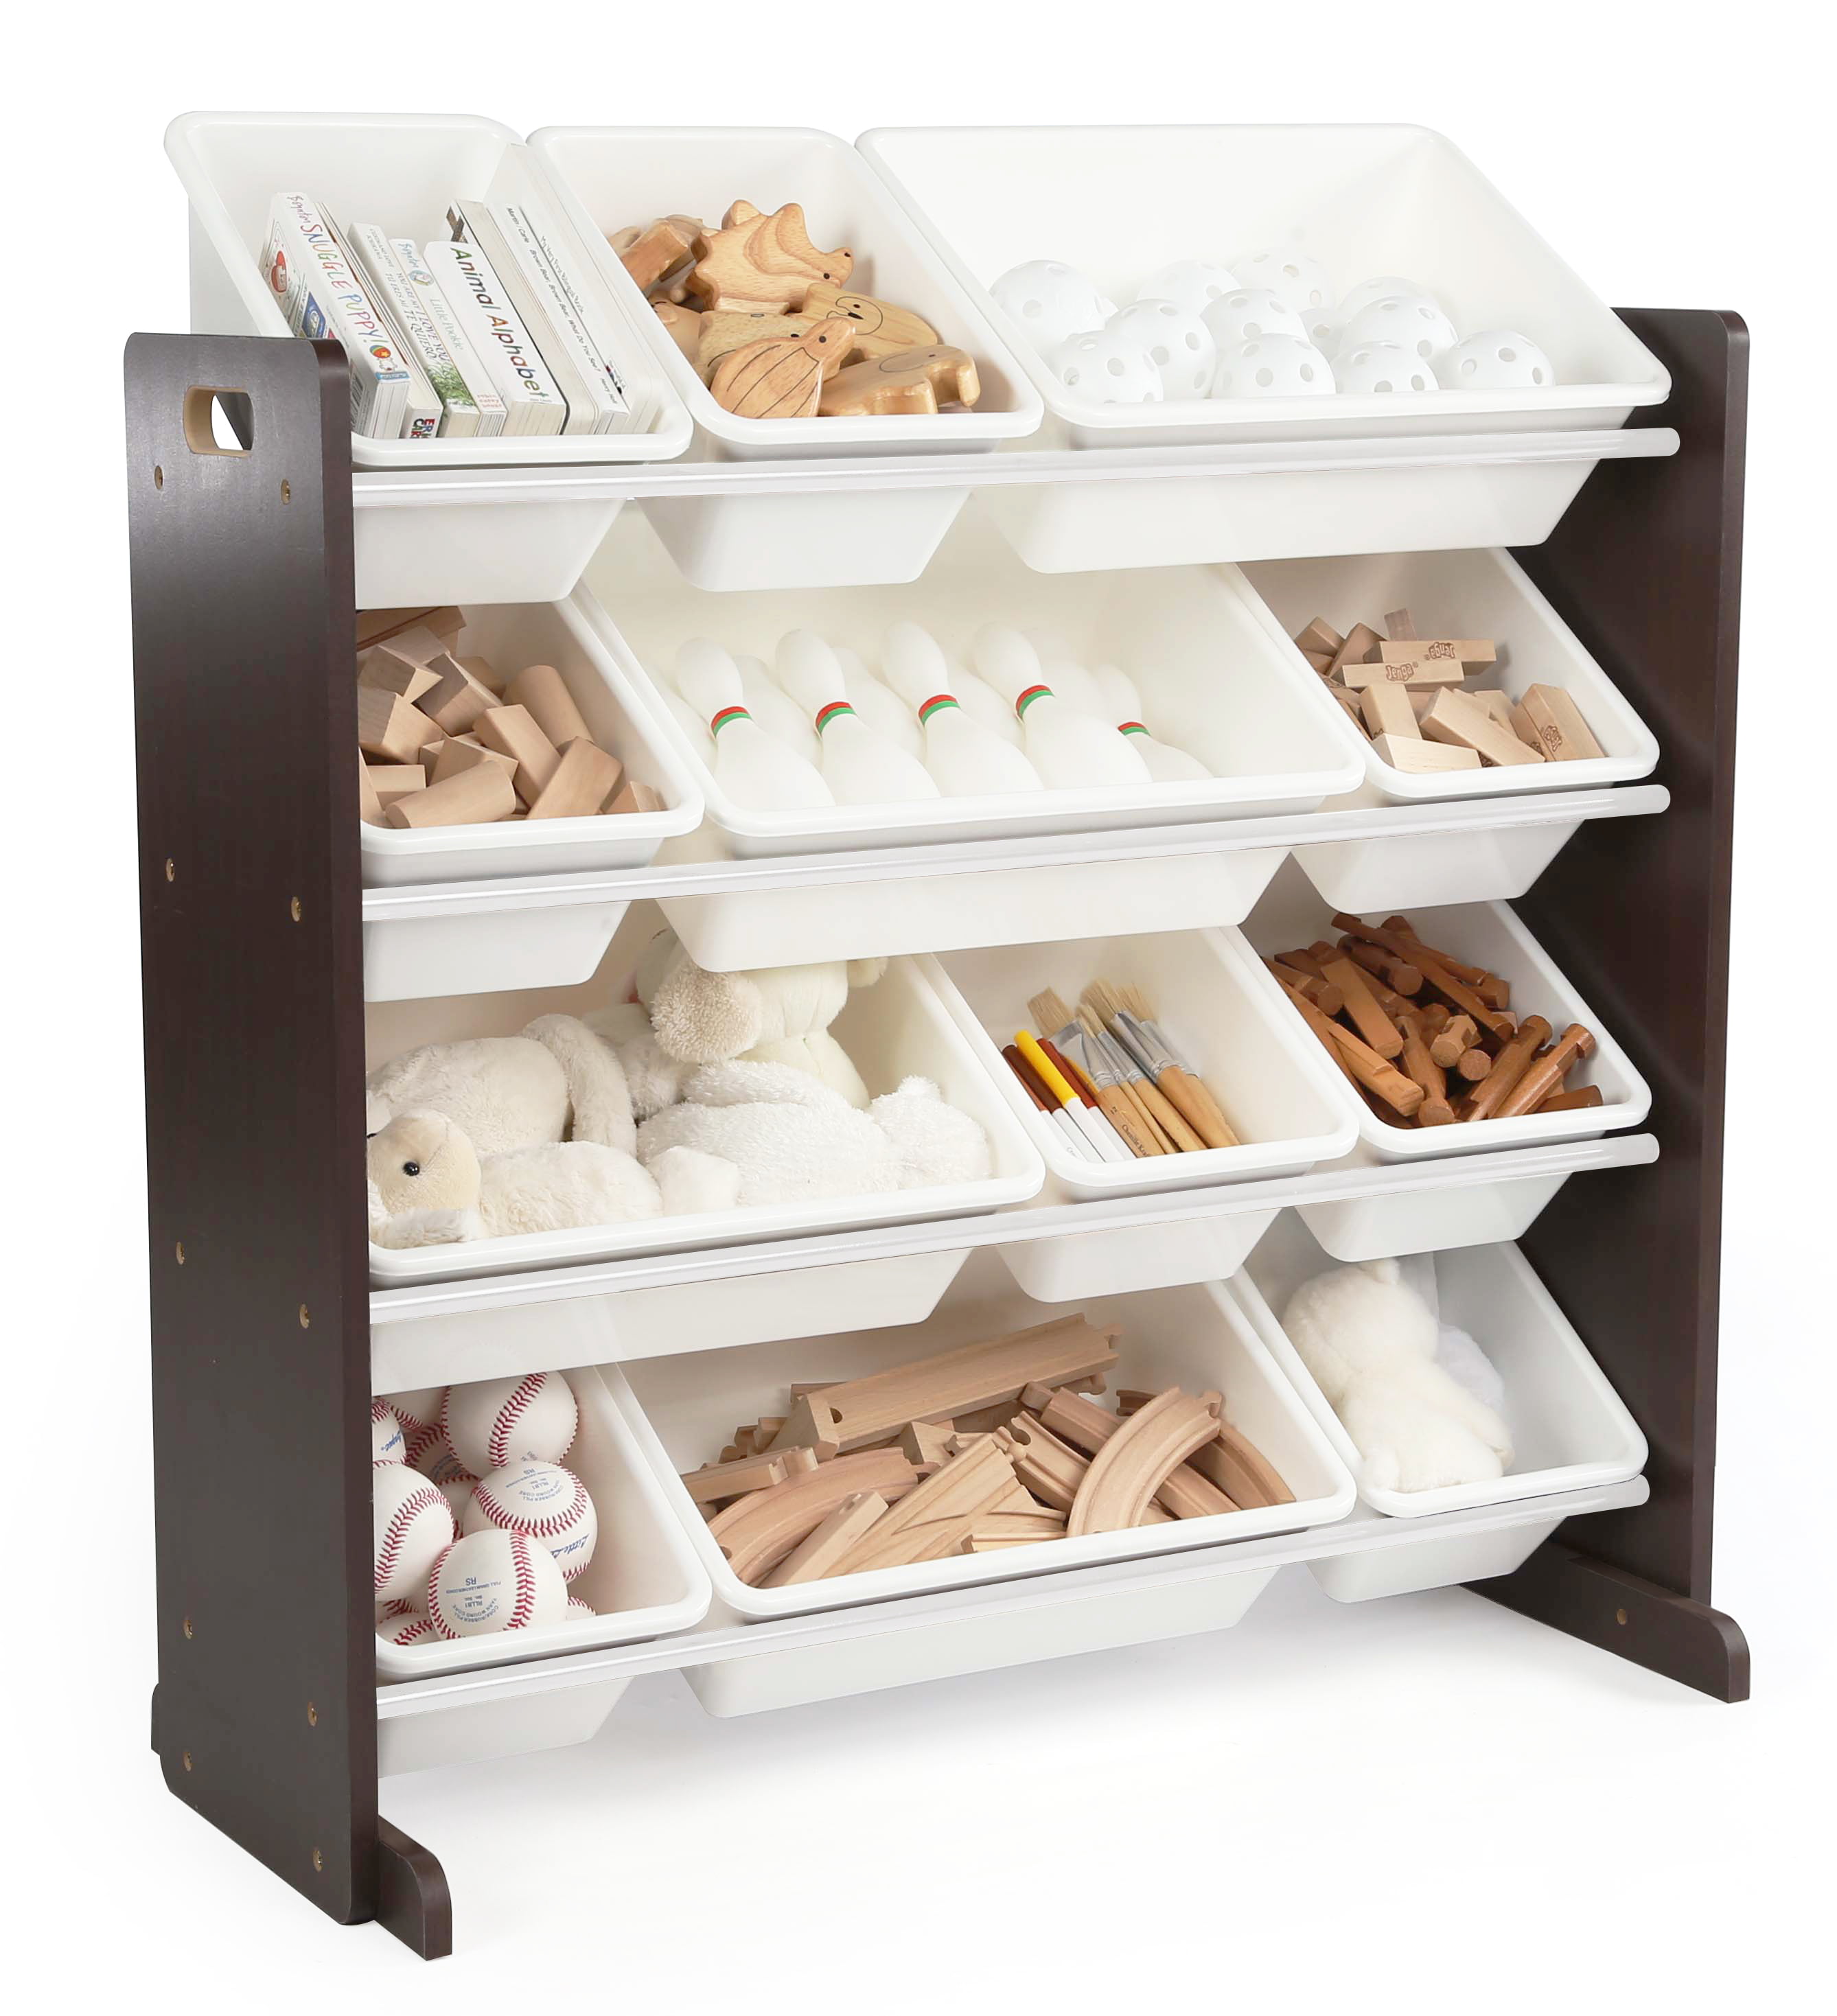 Humble Crew Children Plastic Organizing Rack with 12 Bins, Espresso and White - image 3 of 9